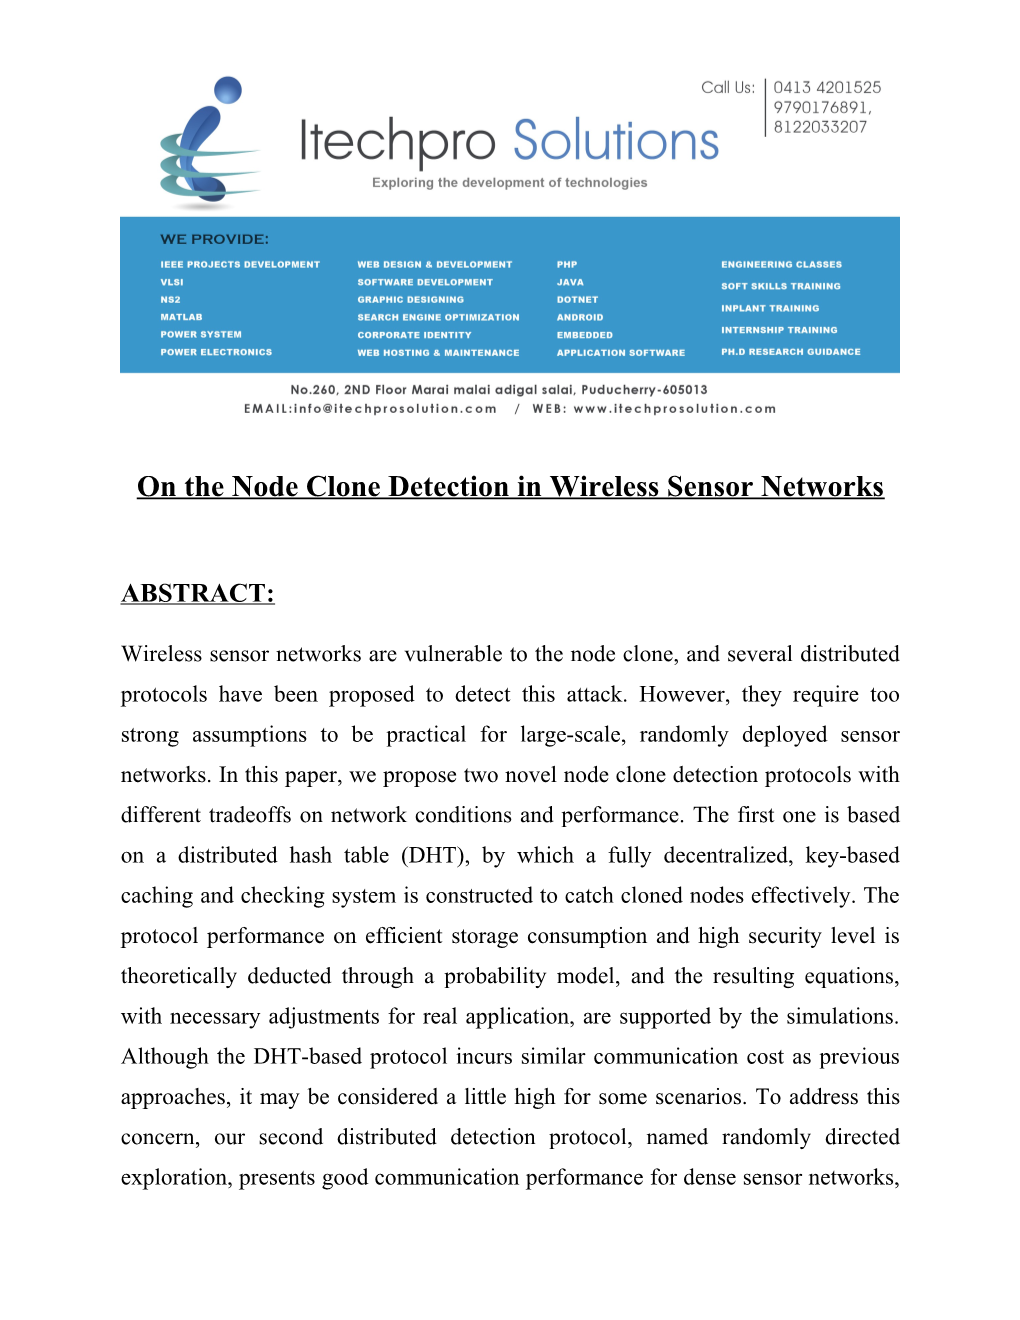 On the Node Clone Detection in Wireless Sensor Networks